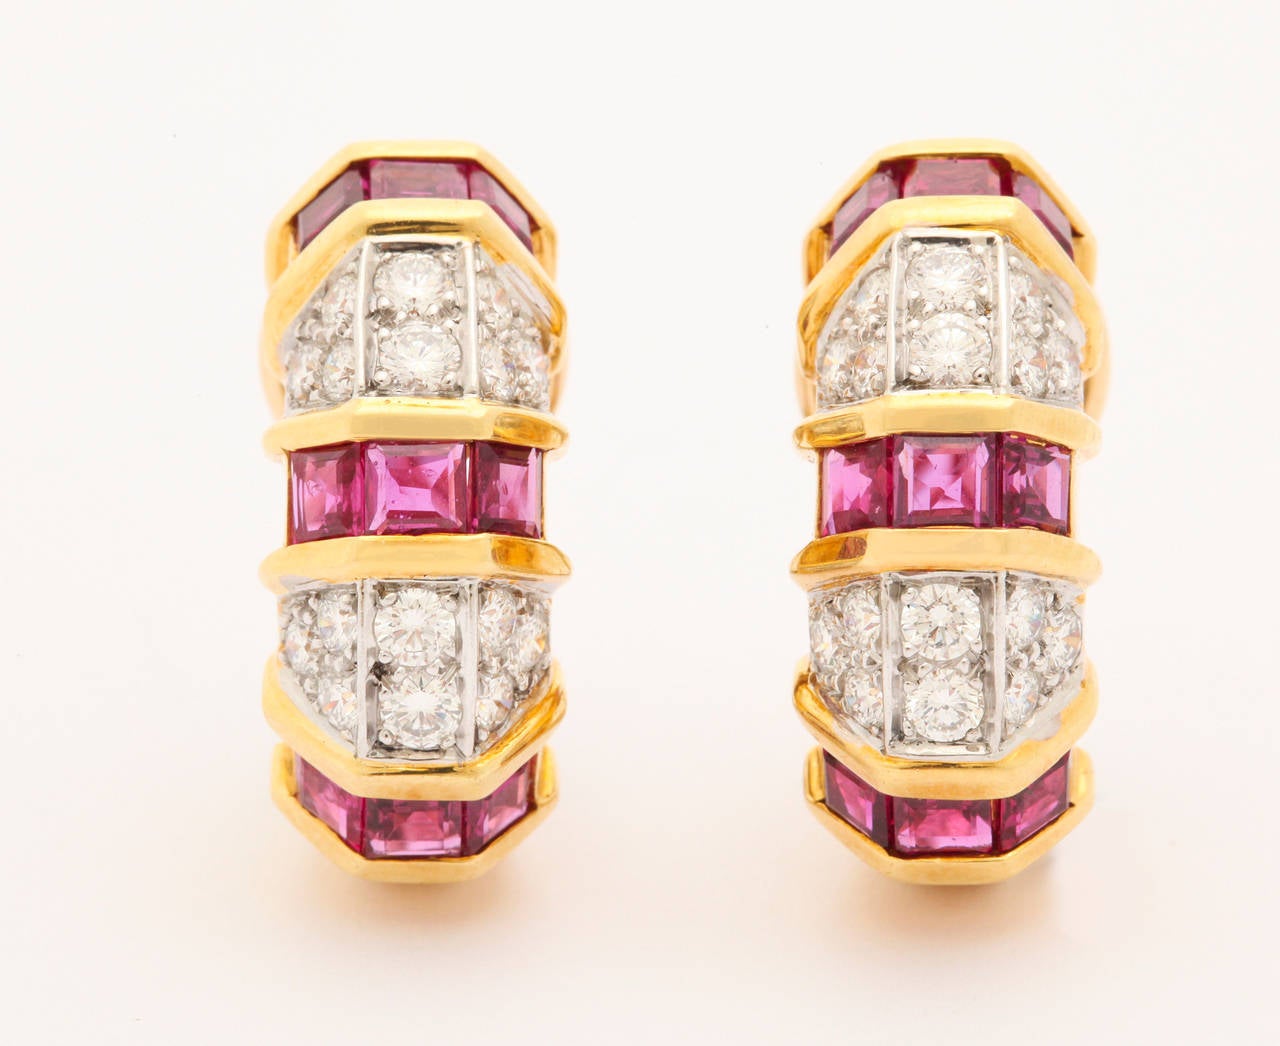 Classic diamond and ruby earrings. The stones in these earrings are of very high quality. The rubies are square cut and have a beautiful red color. The diamonds are round cut stones, very clean, white and really sparkle. The diamonds are mounted in